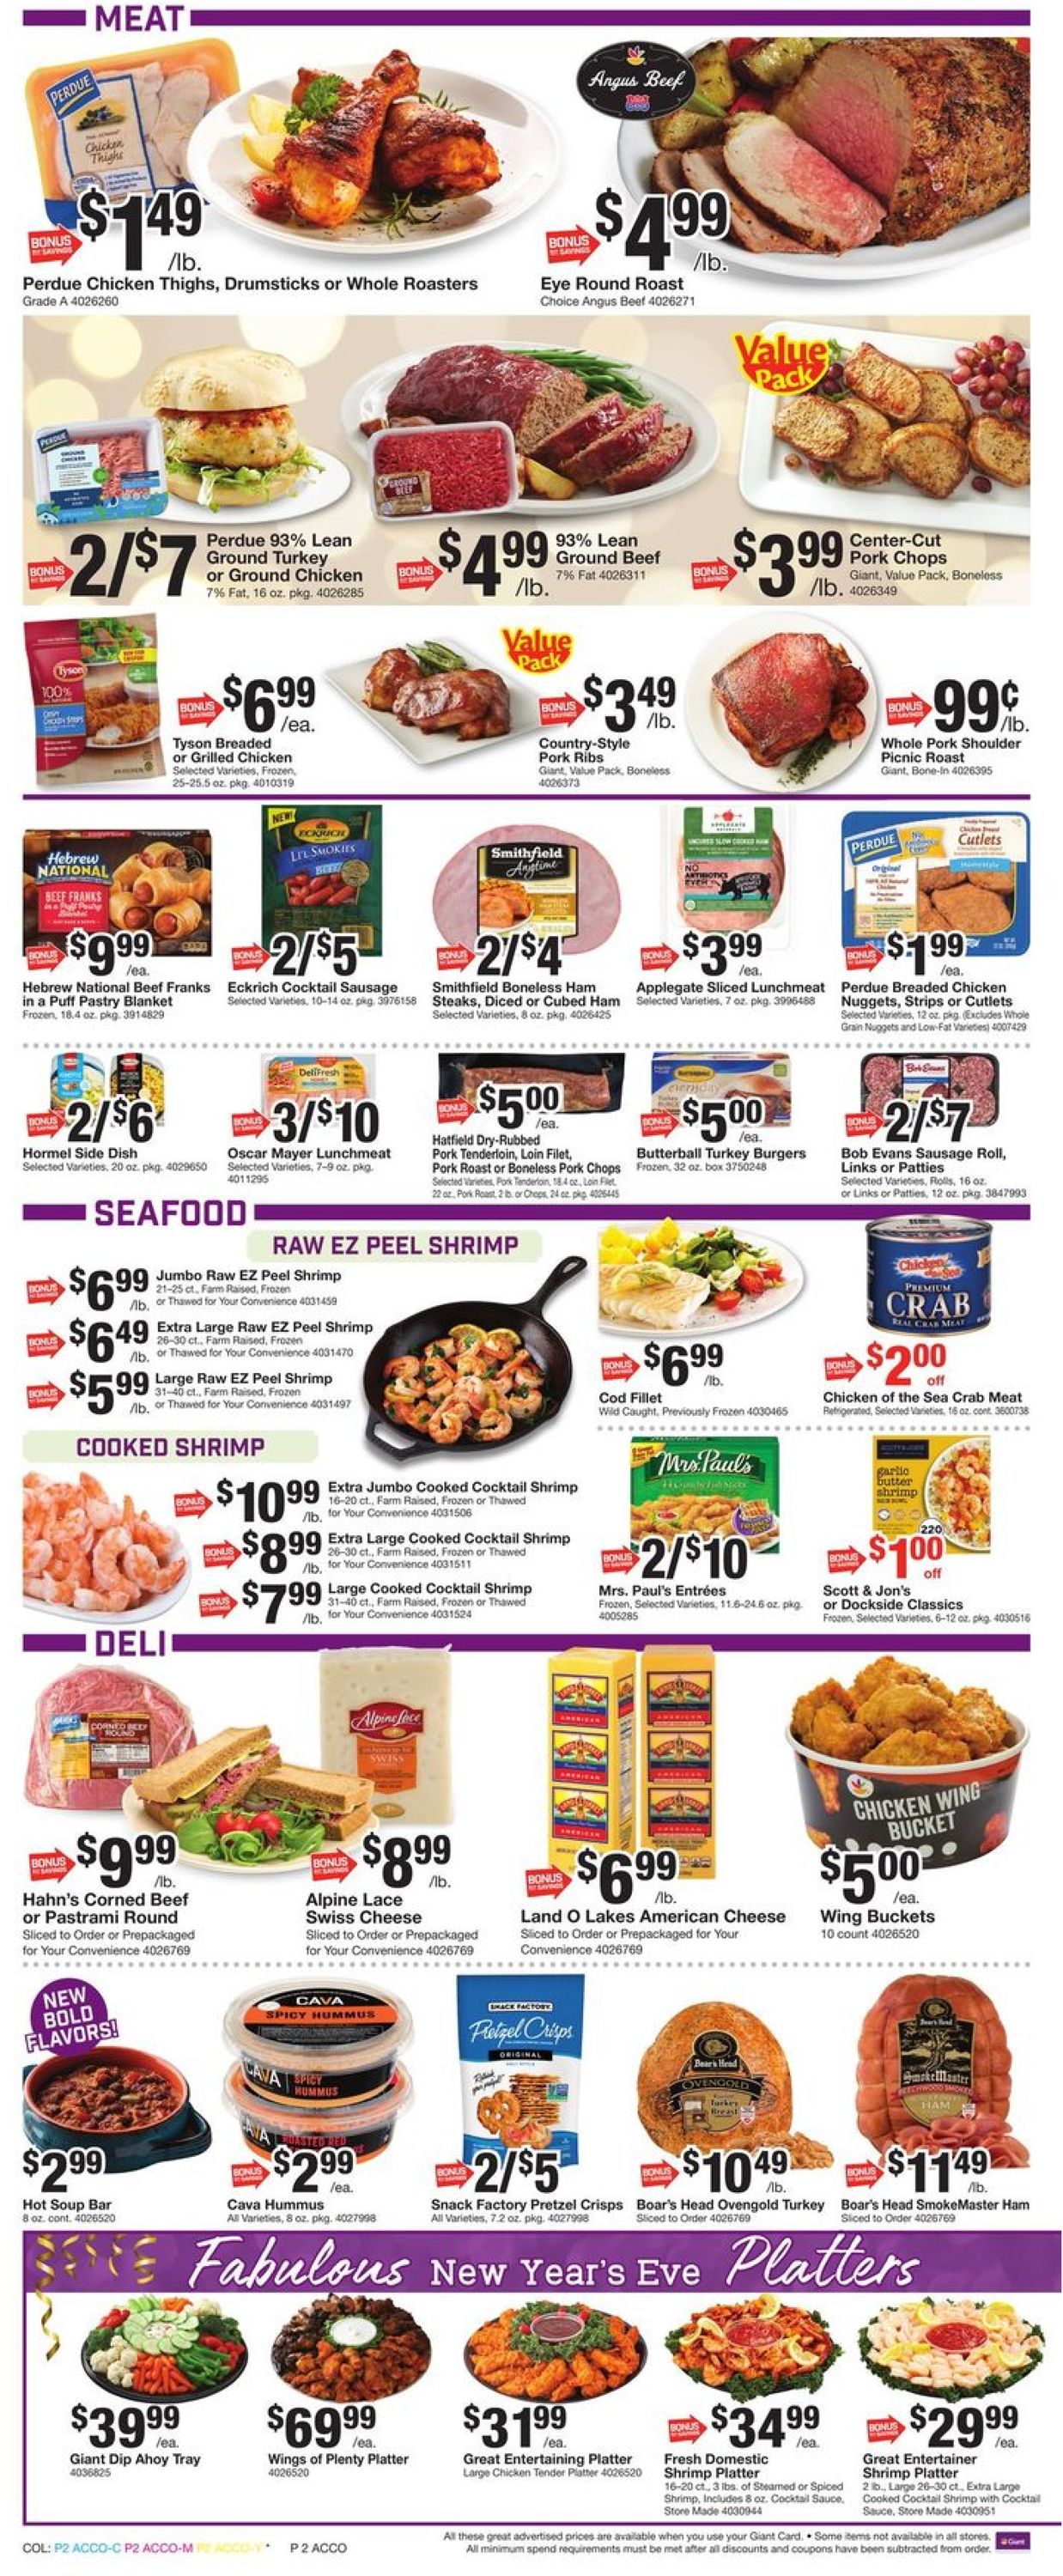 Giant Food - New Year's Ad 2019/2020 Weekly Ad Circular - valid 12/27-01/02/2020 (Page 4)